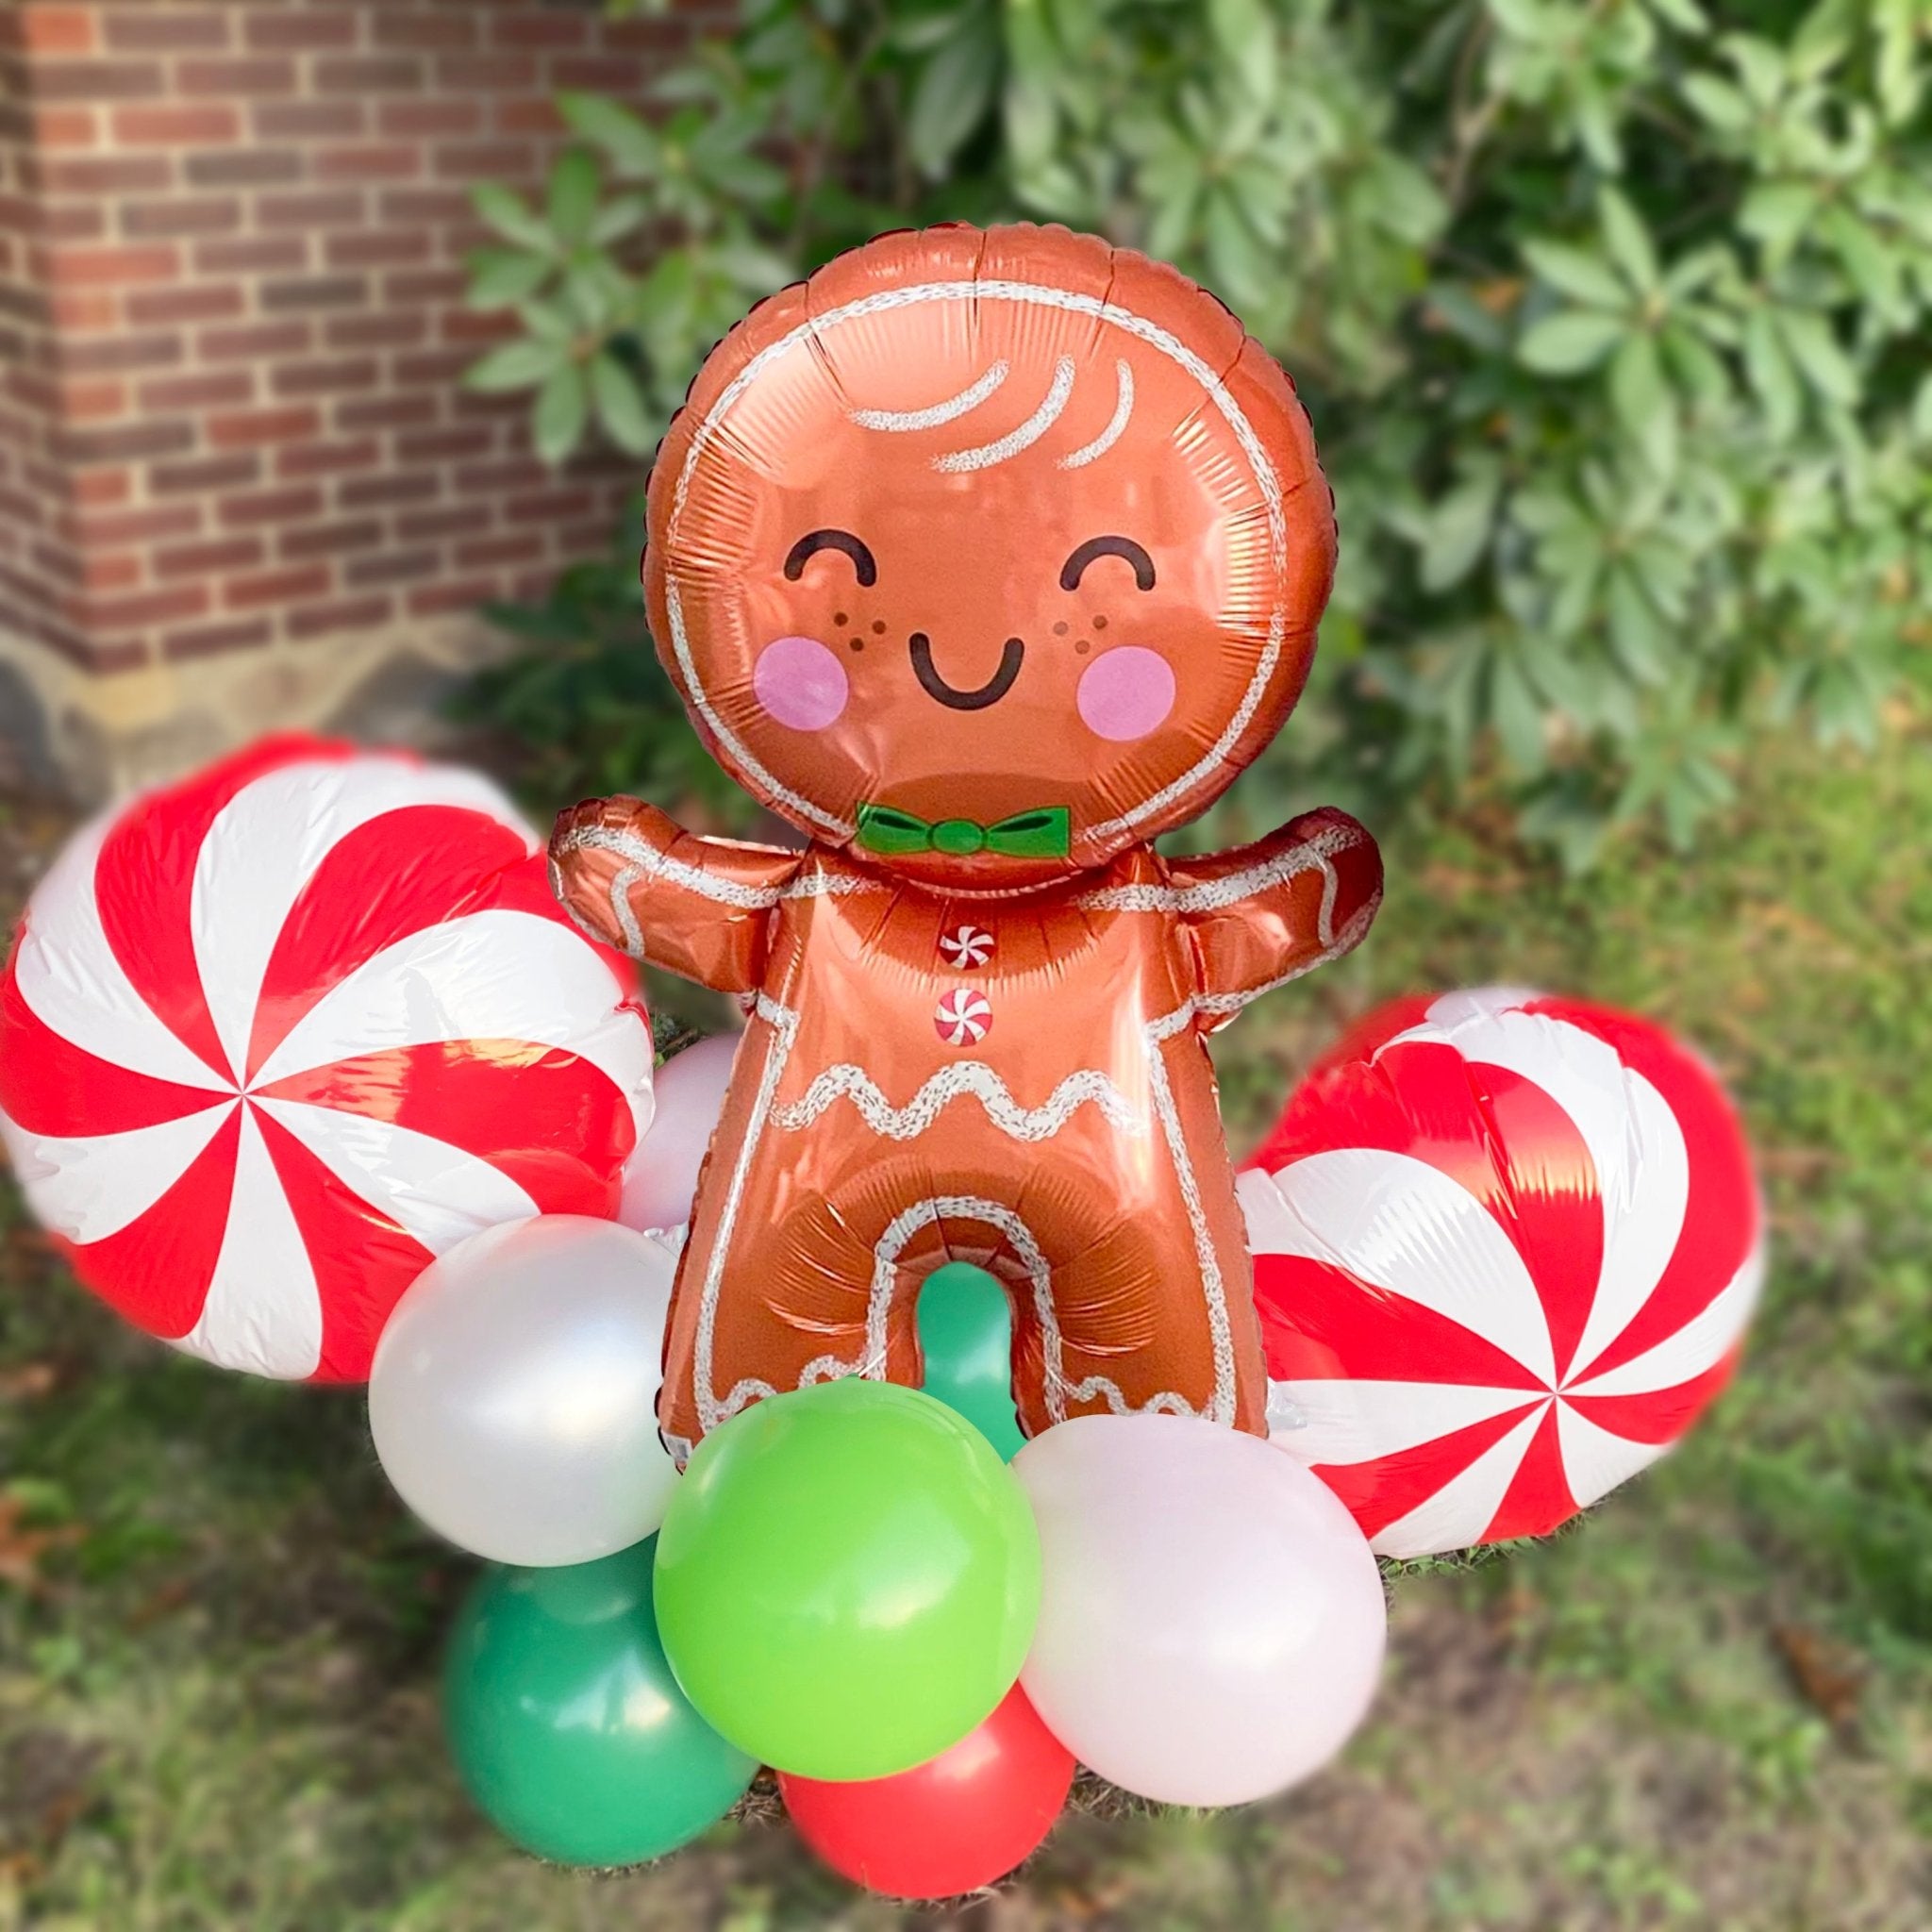 Gingerbread Man Balloon Bouquet Kit from Ellie's Party Supply